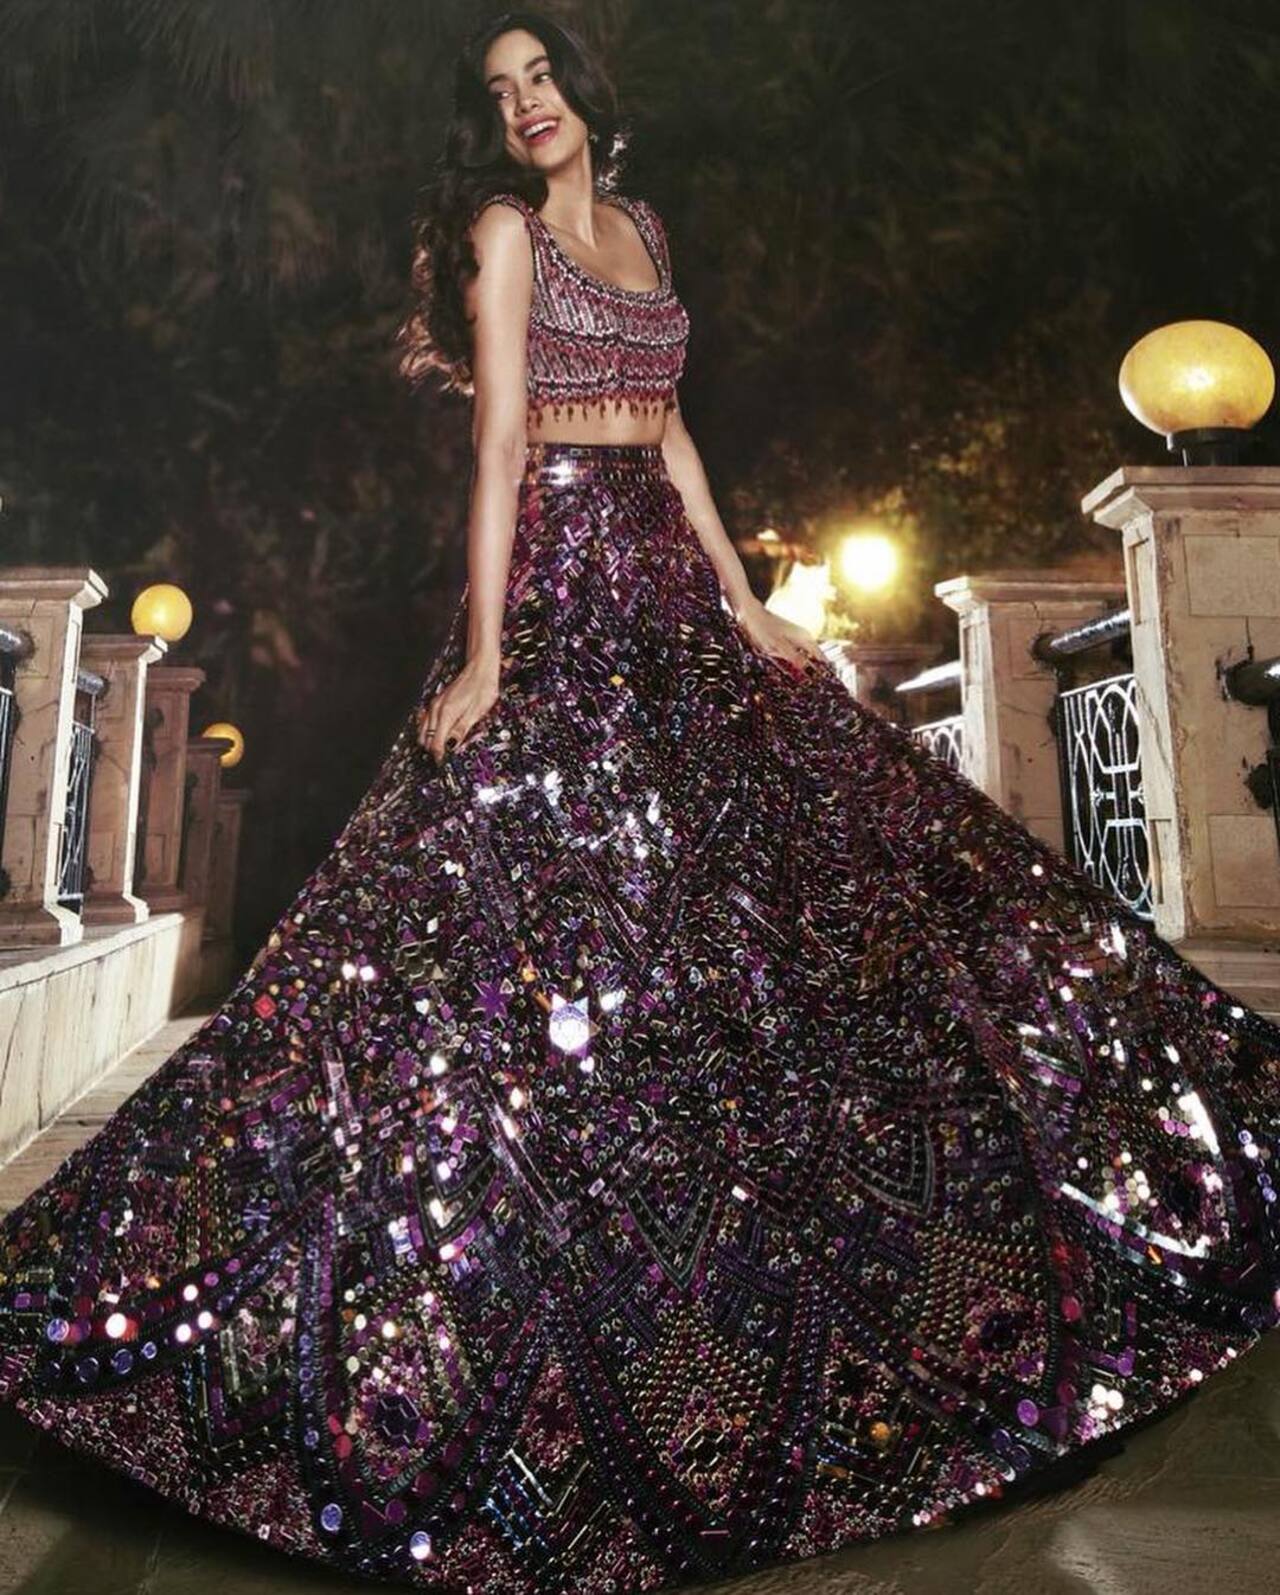 For Priyanka Chopra and Nick Jonas' wedding reception, Janhvi opted for an ultra-glam look. She wore a wine-colored, sequin-rich Manish Malhotra lehenga, complete with a matching blouse adorned in crystals and beads